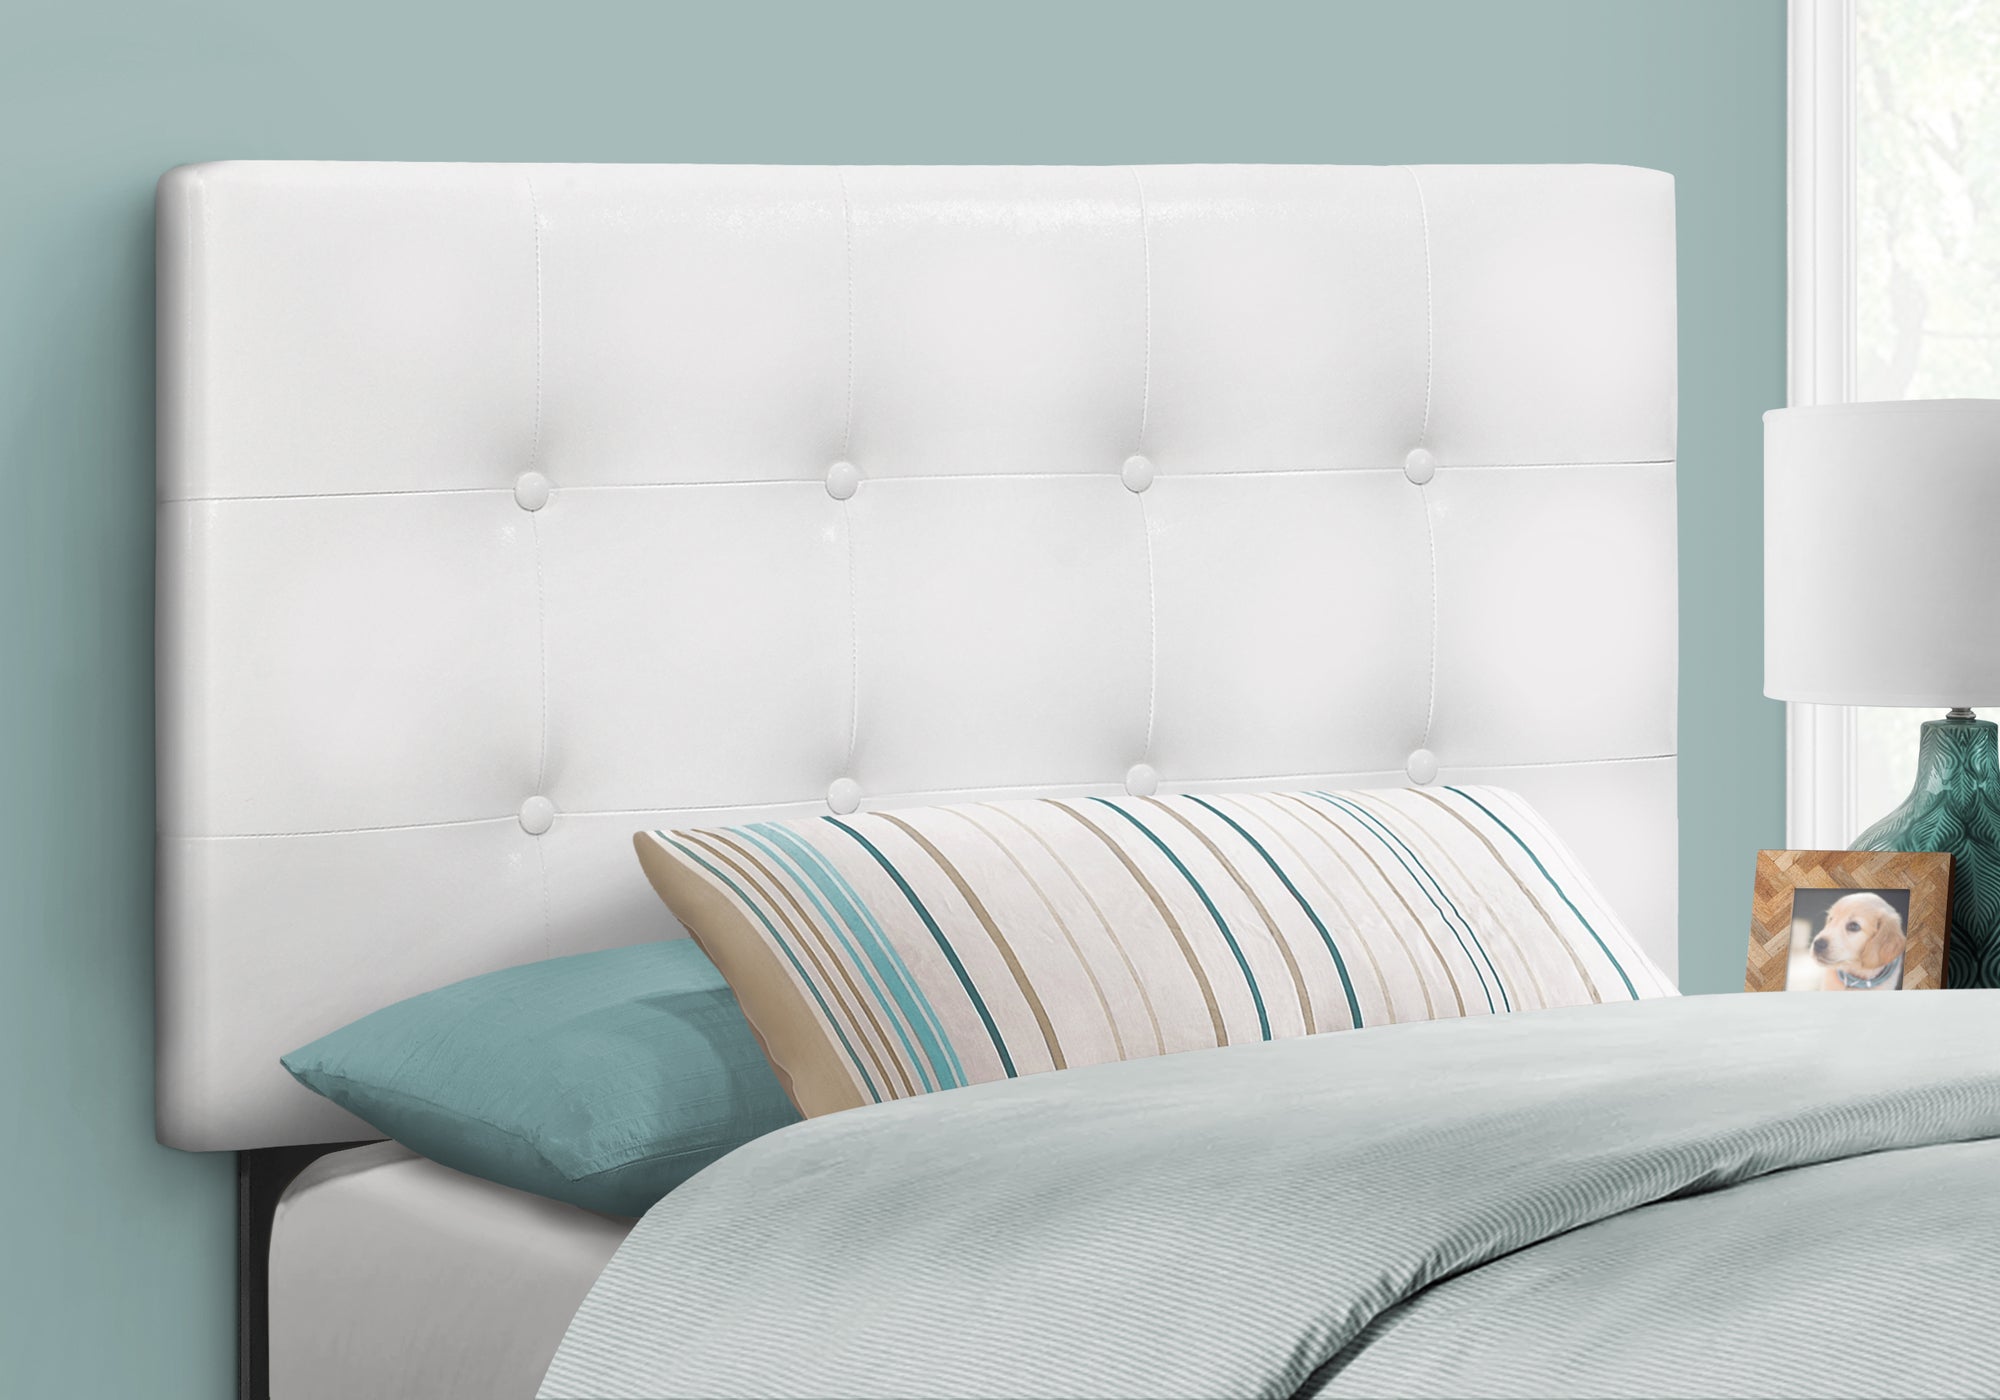 MN-416002T    Headboard, Bedroom, Twin Size, Upholstered, Leather Look, Wooden Frame, White, Black, Contemporary, Modern